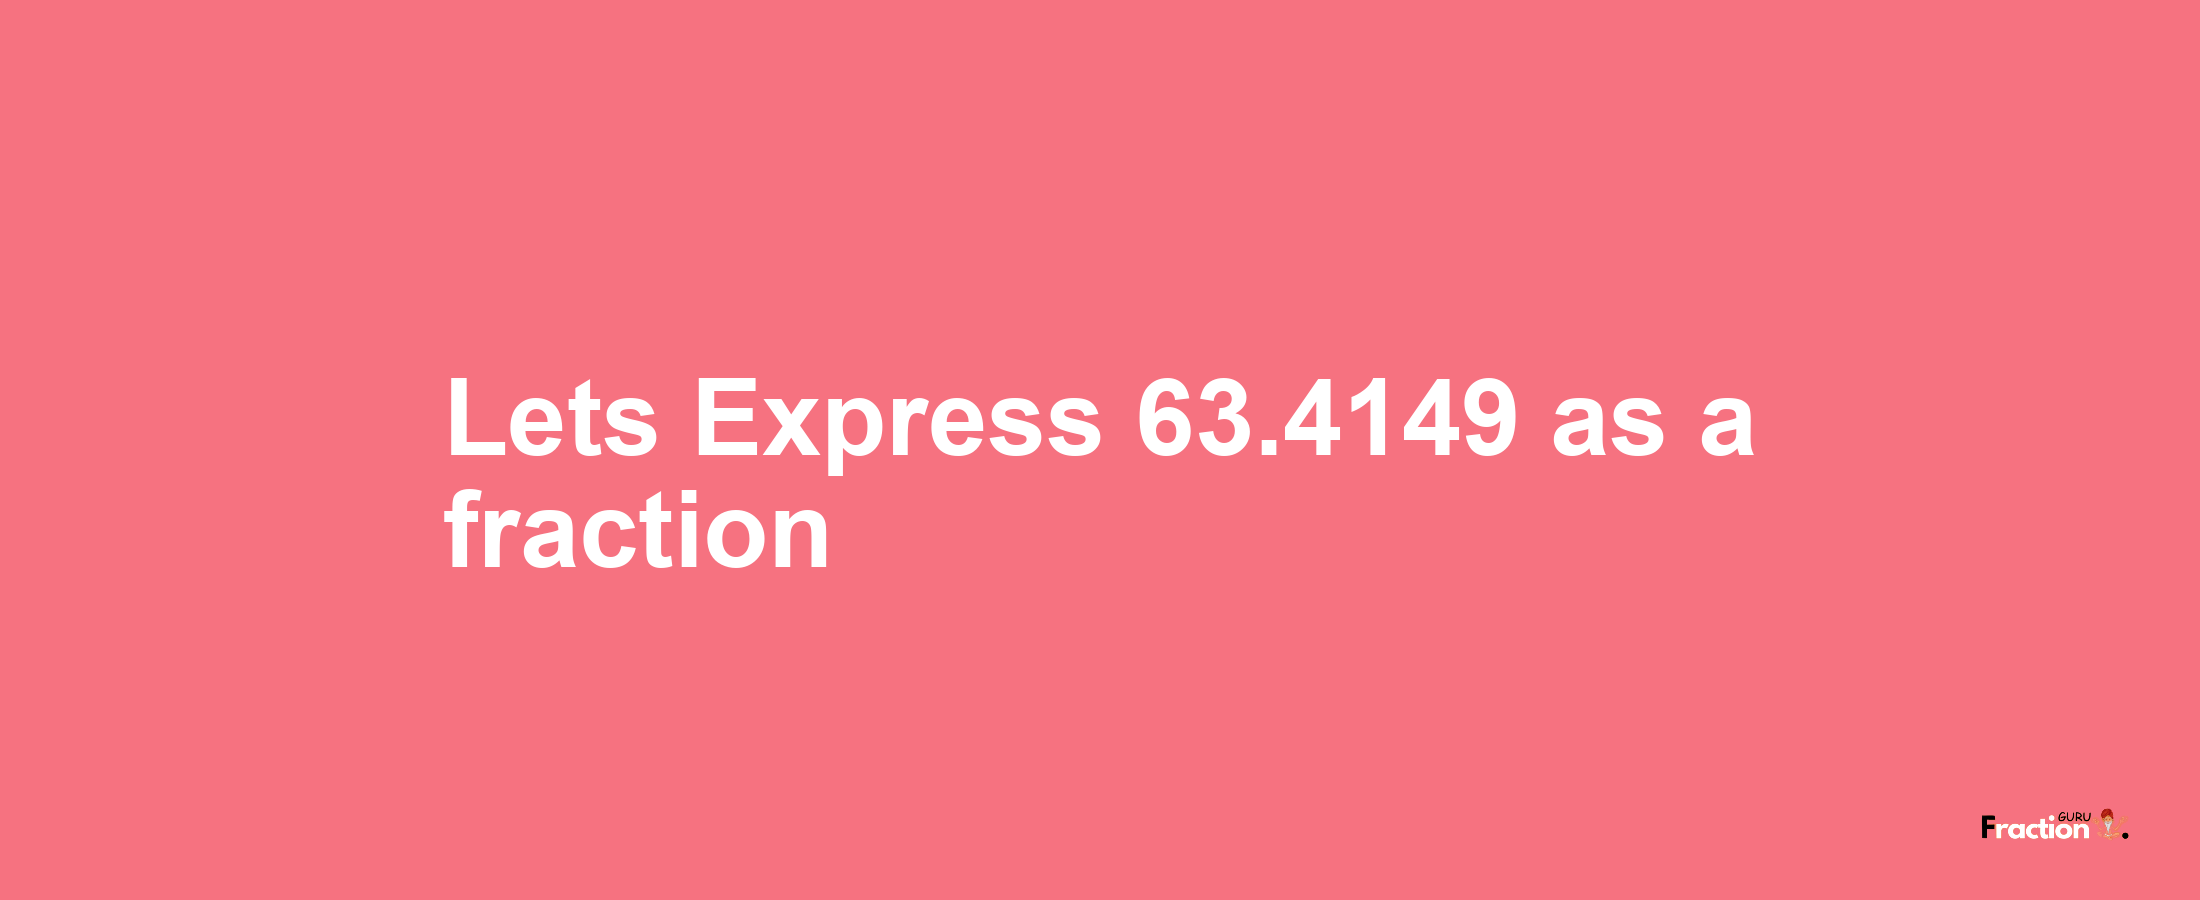 Lets Express 63.4149 as afraction